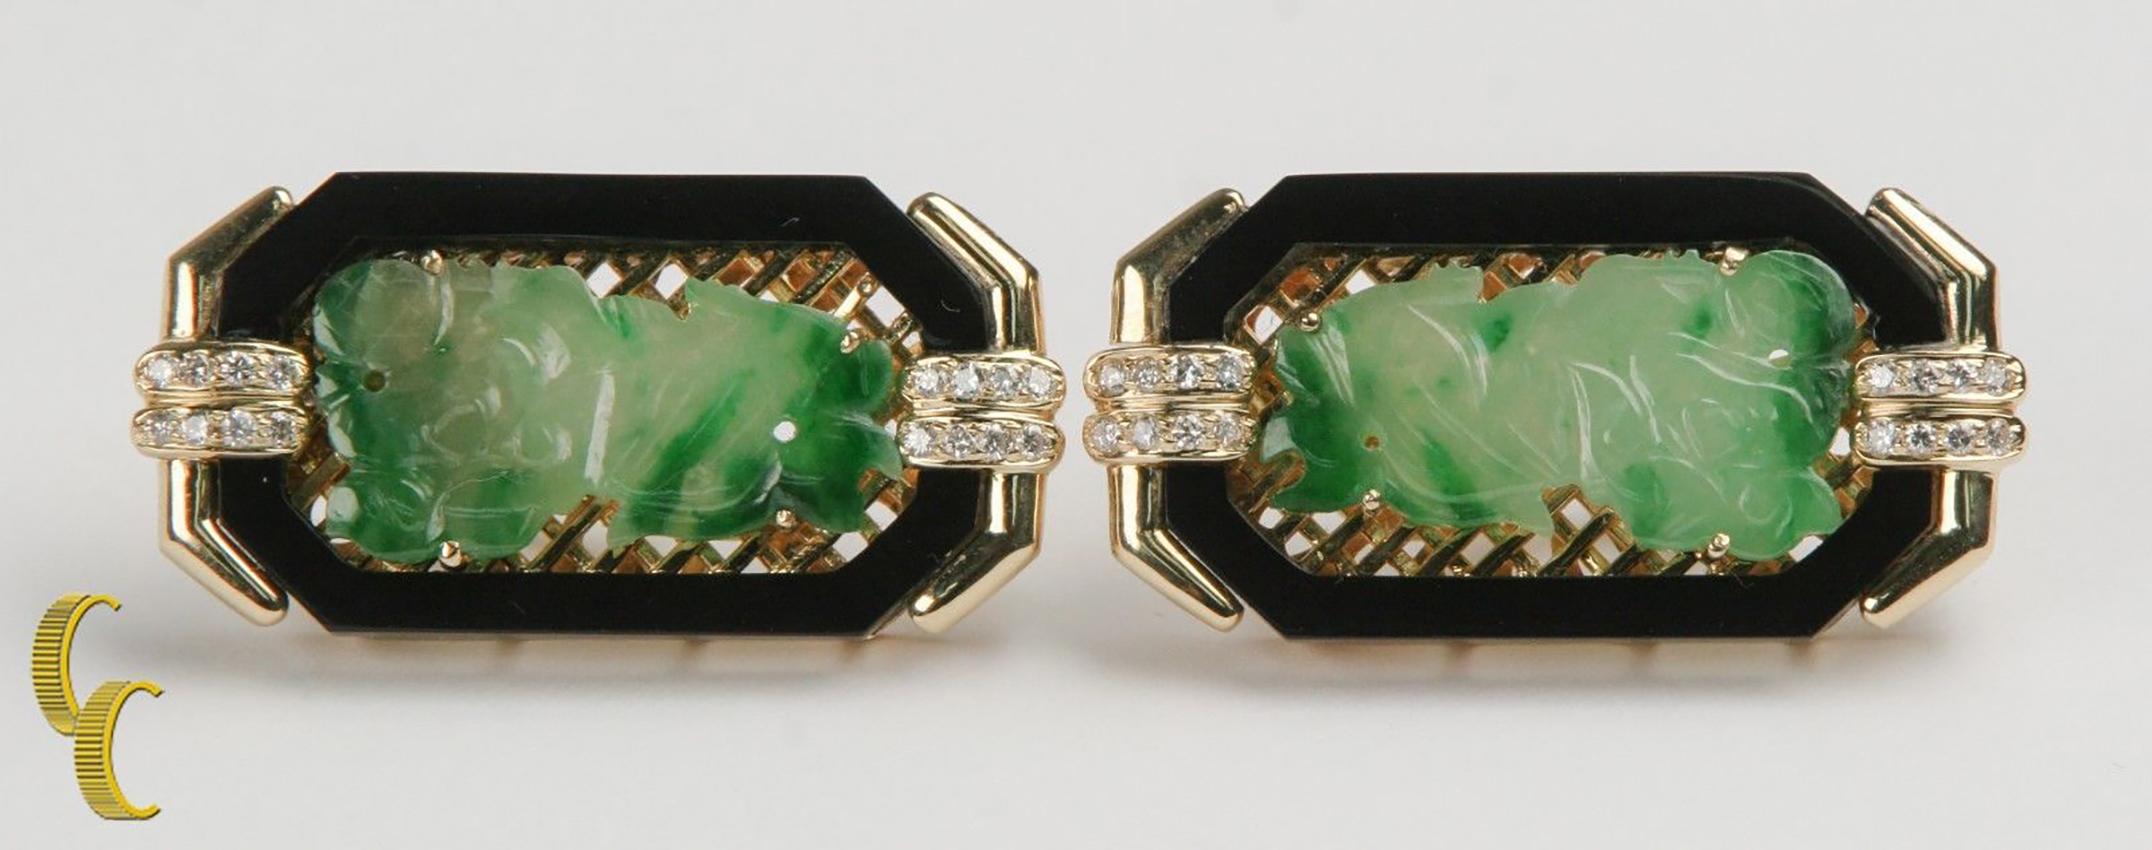 Gorgeous 18k Yellow Gold Huggie Earrings
Feature Prong-Set Carved Imperial Jade Stones Over Cross-Hatched 18k Gold Background Set over Gallery
Framed within Carved Onyx Rectangle
Includes 16 Round Brilliant Diamond Accents
Total Mass = 26.5